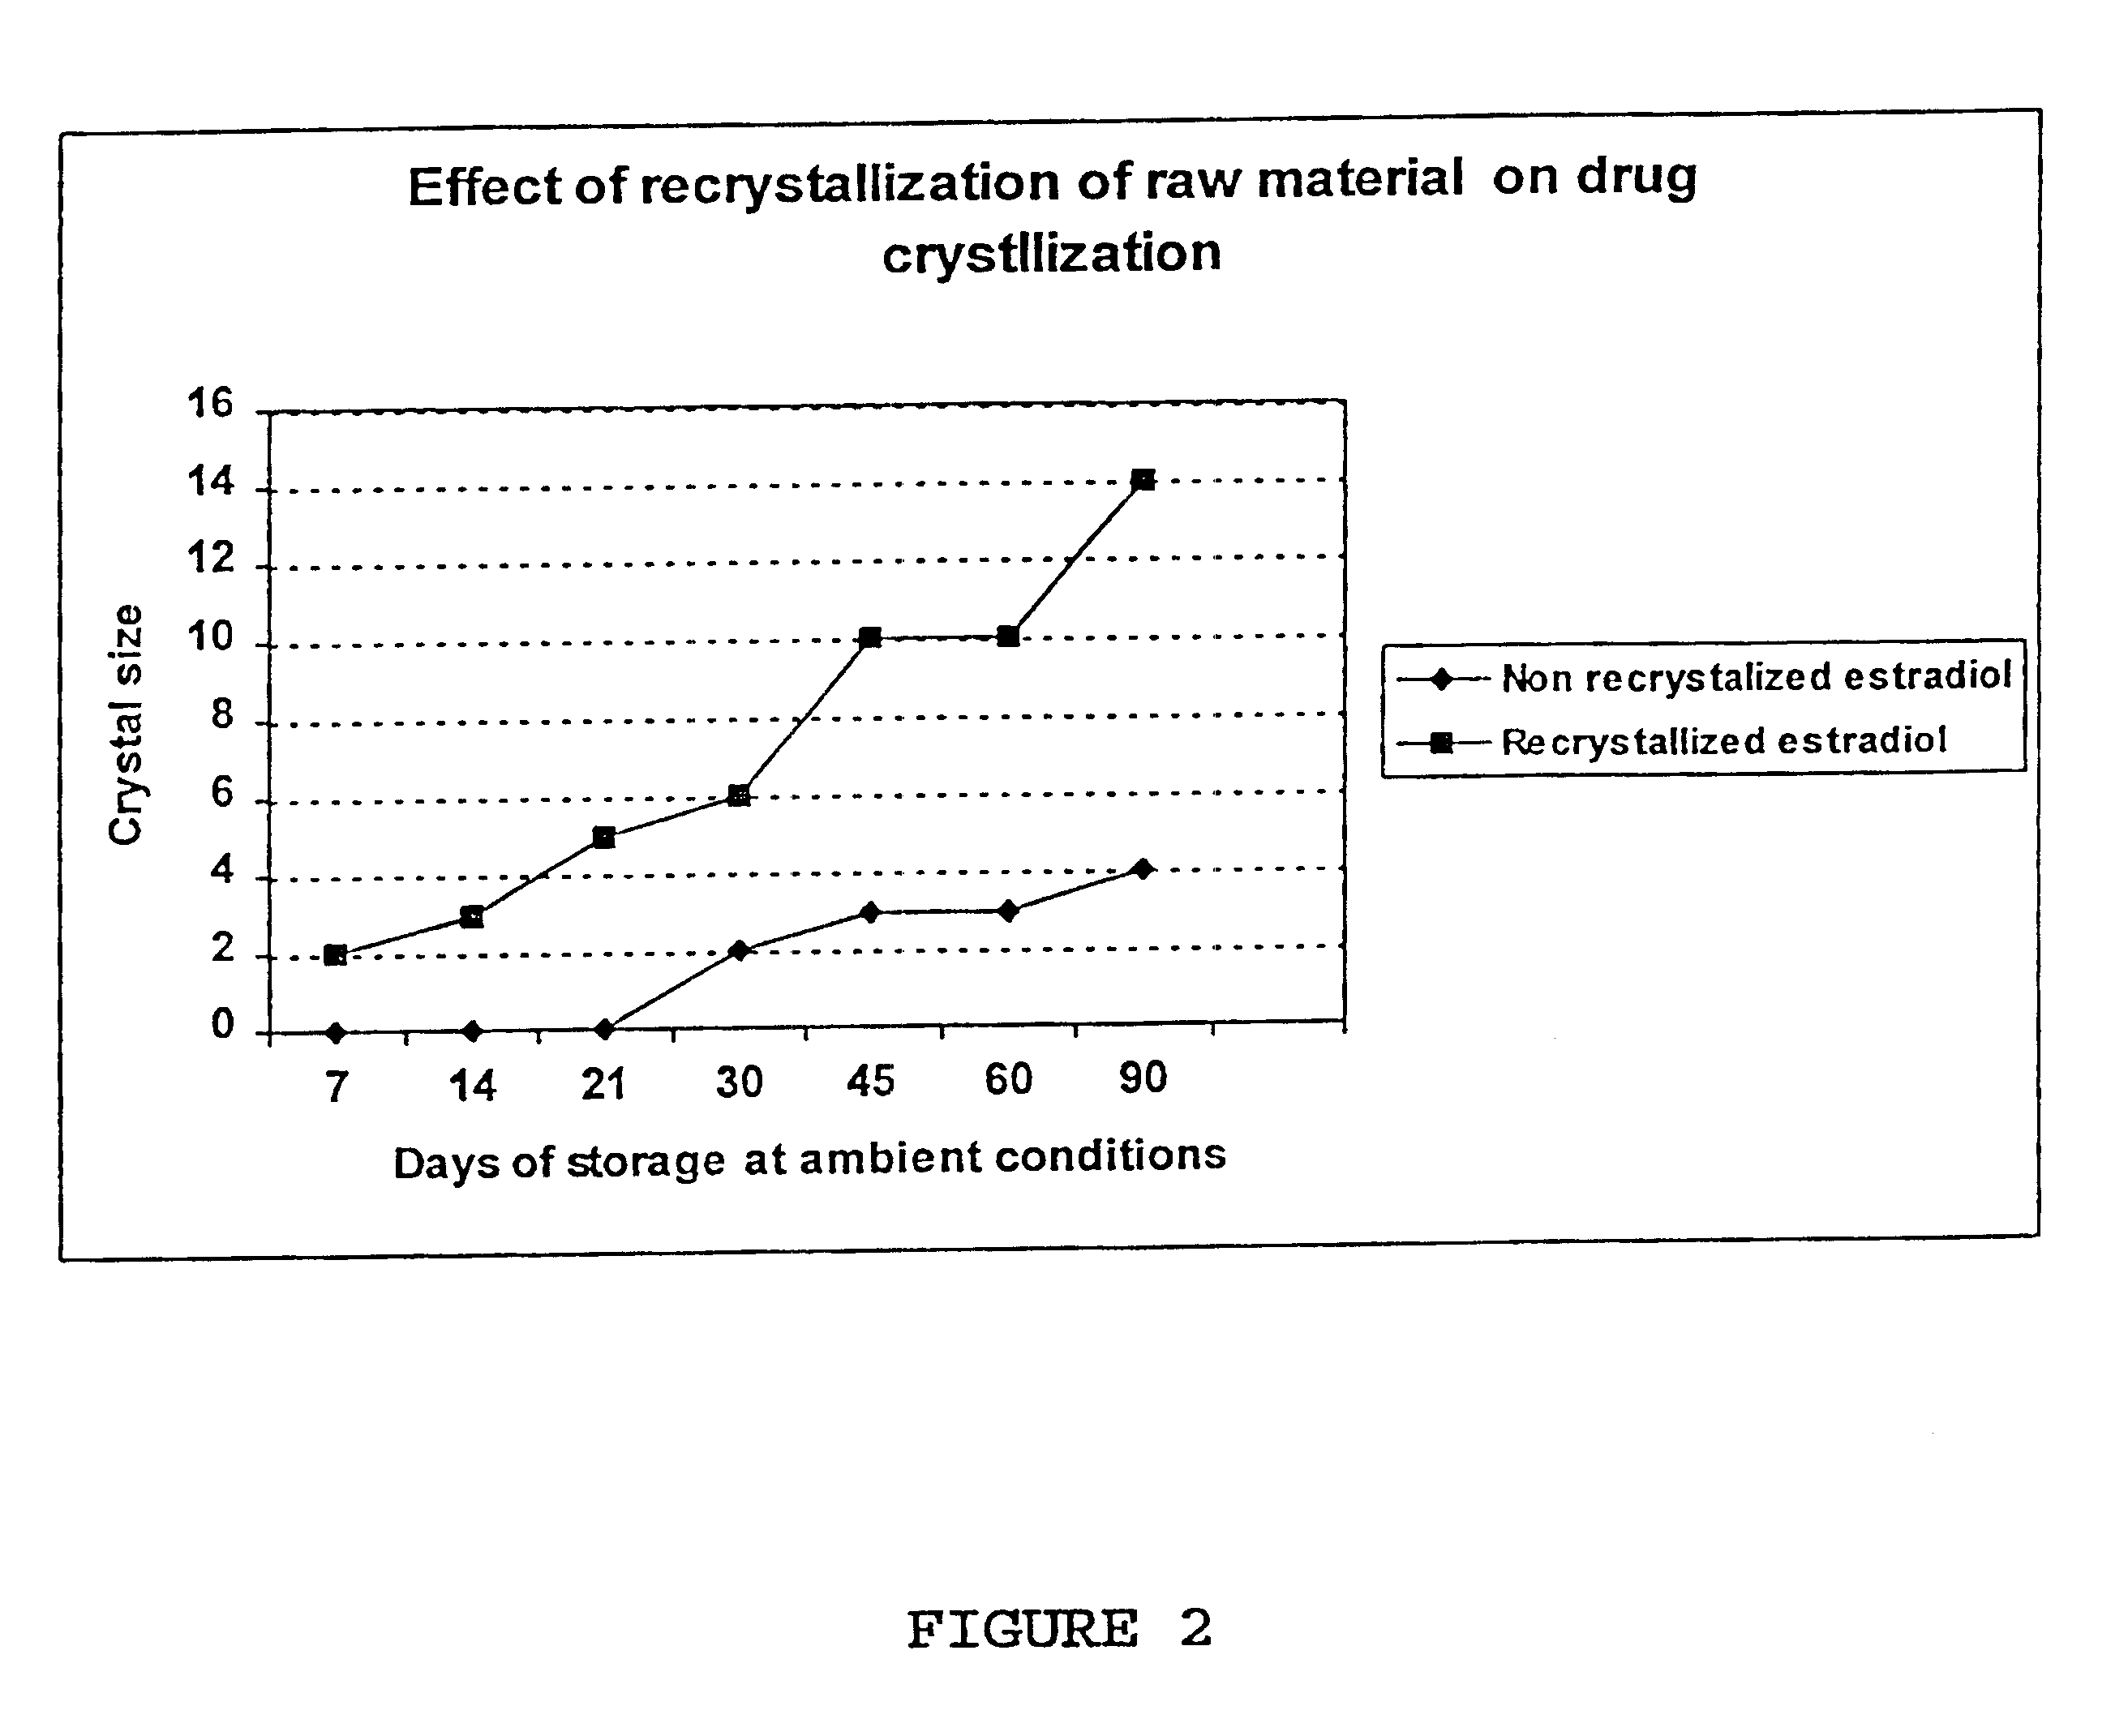 Inhibition of crystallization in transdermal devices